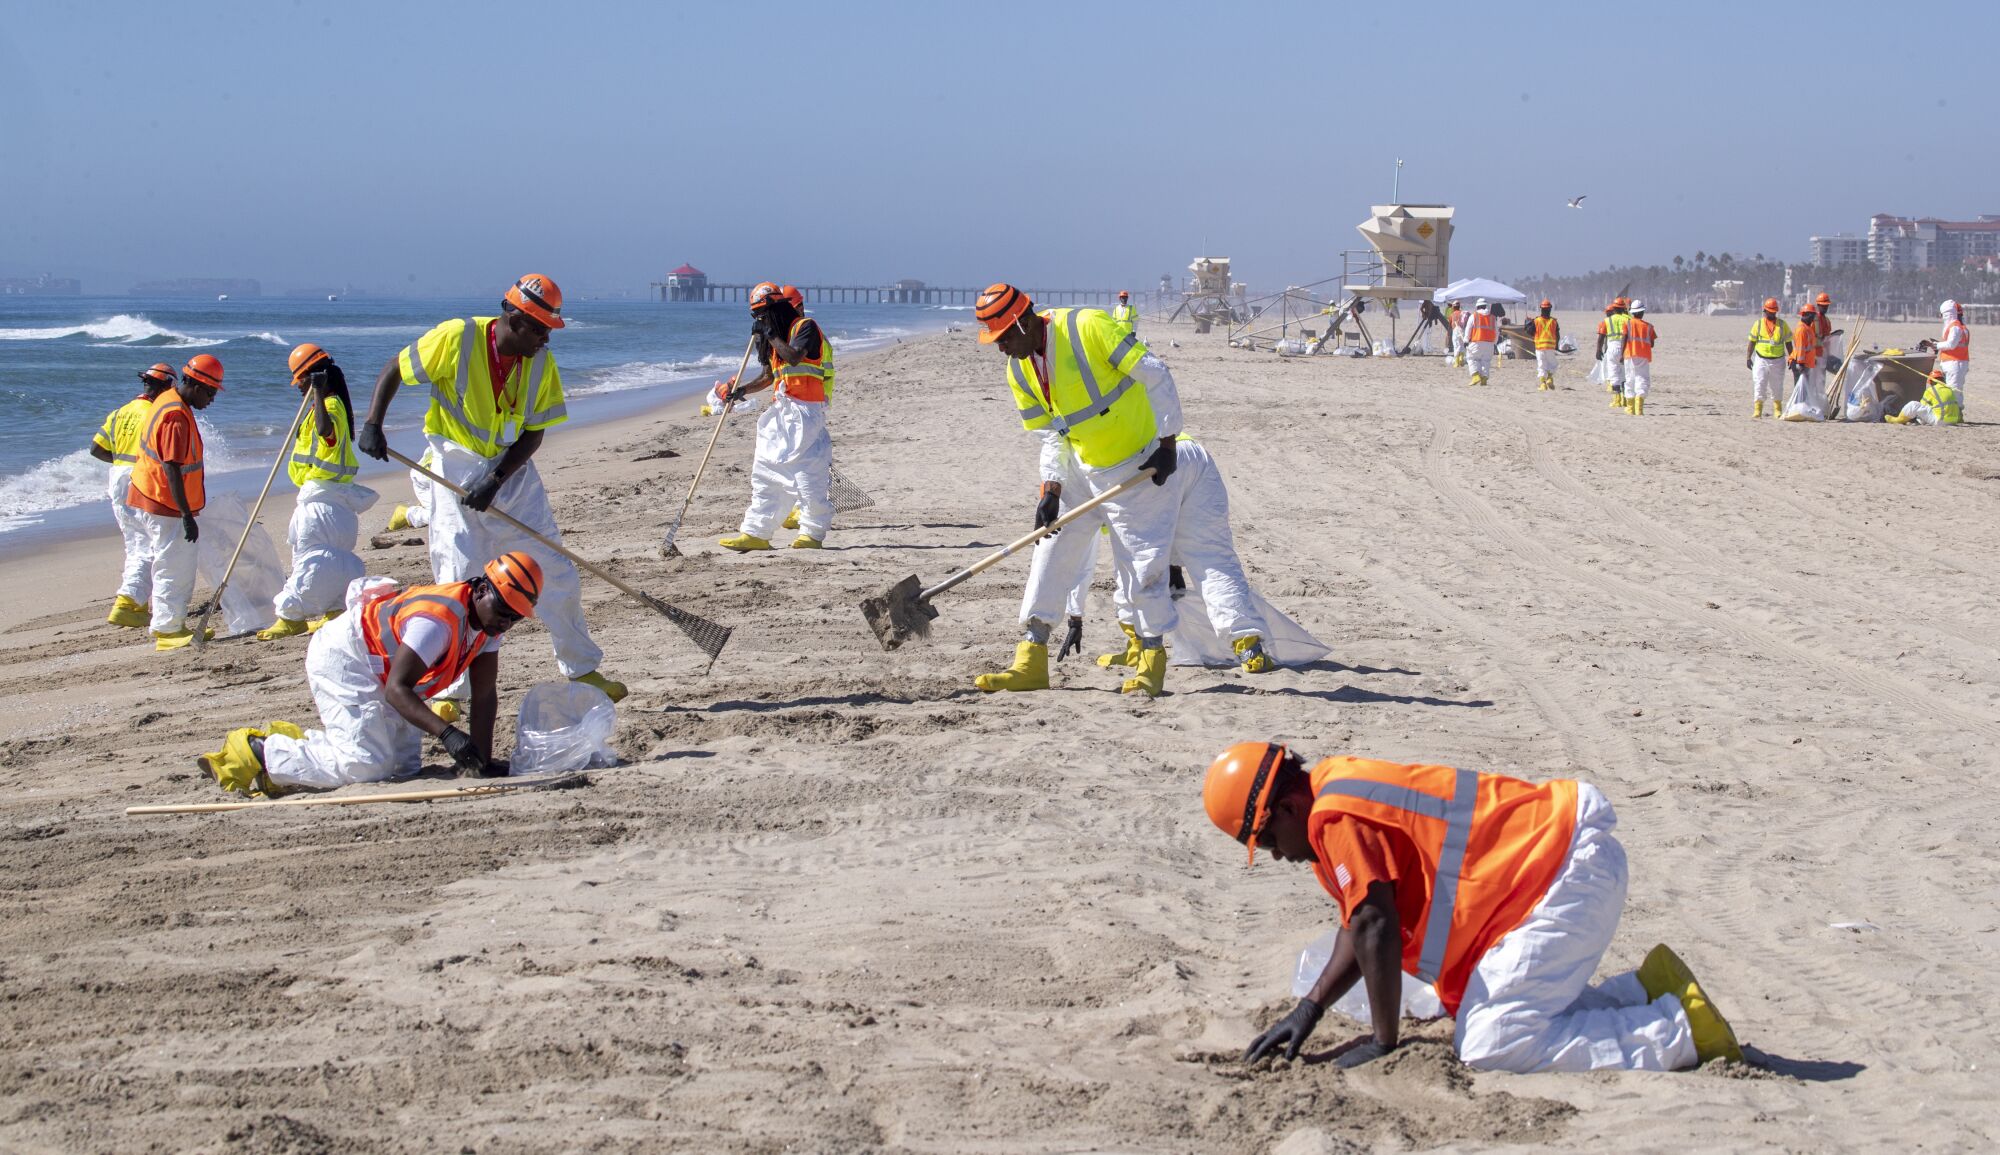 Crew members in yellow and orange vests rake and sift sand on the beach